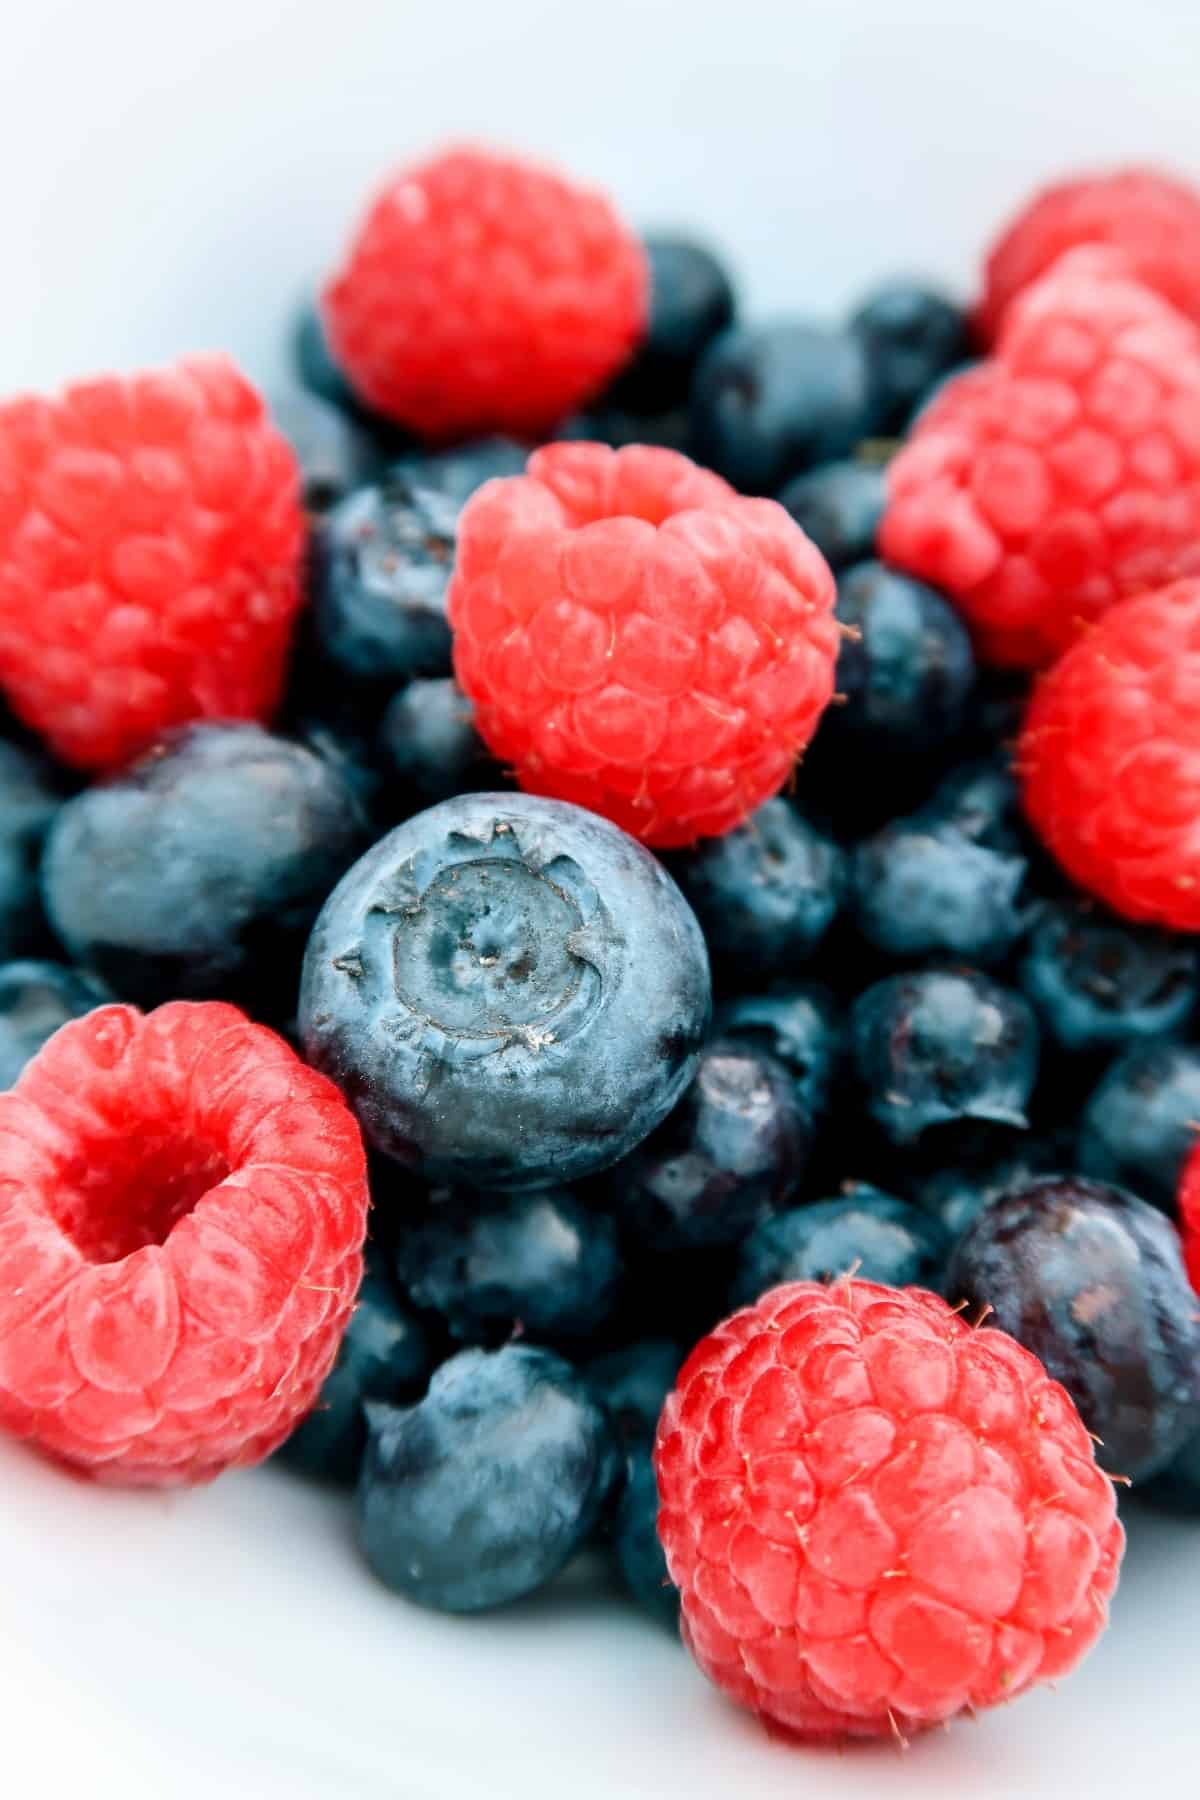 A stack of fresh blueberries and raspberries against white waiting to be added to your alcoholic beverages.